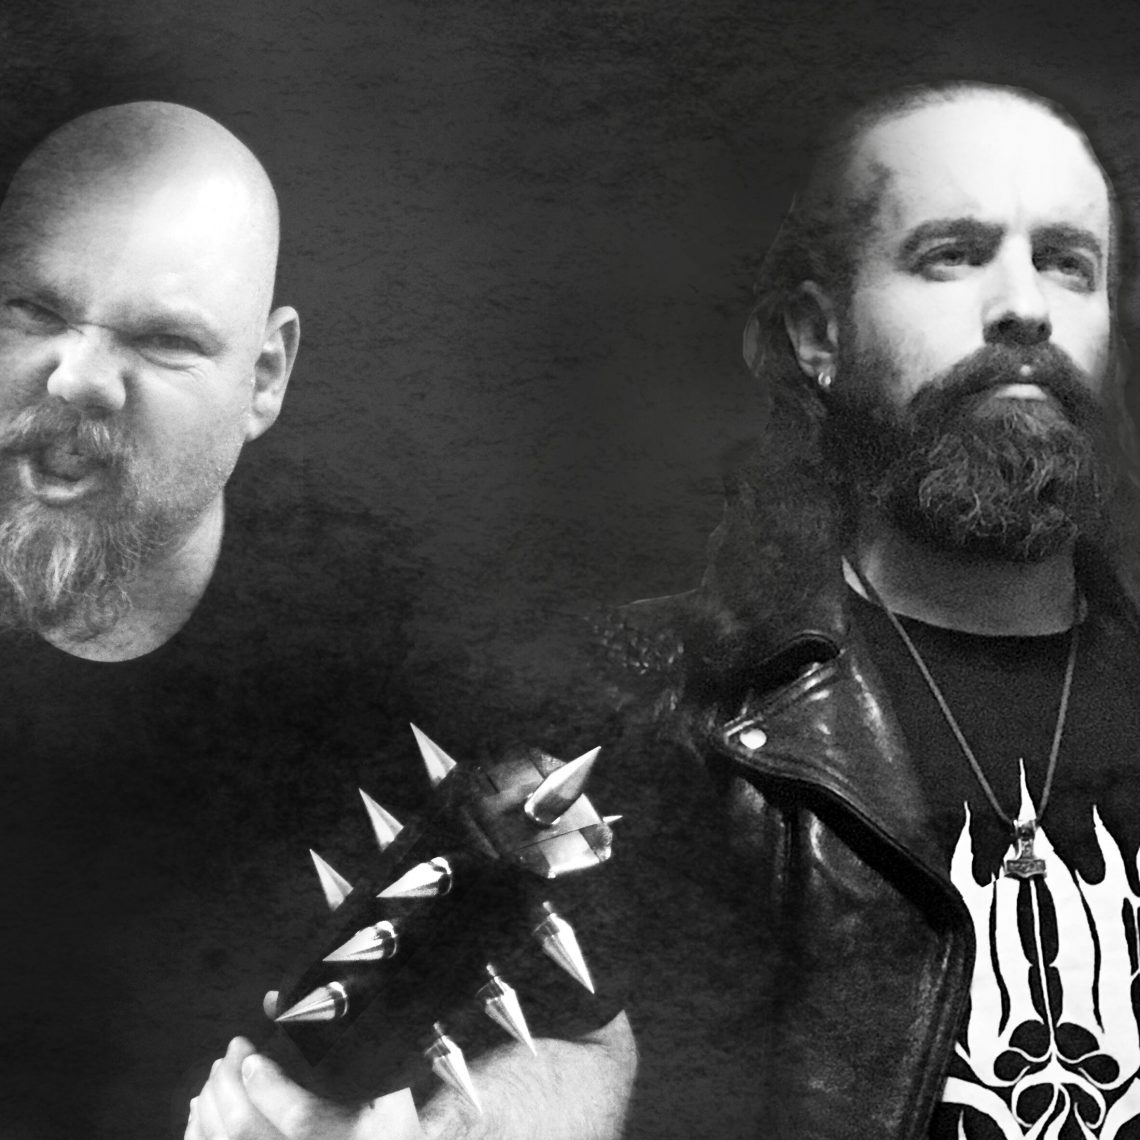 Peaceville to release first studio album from newly reformed black metal legends Mortem (Arcturus, Thorns, Mayhem, 1349)